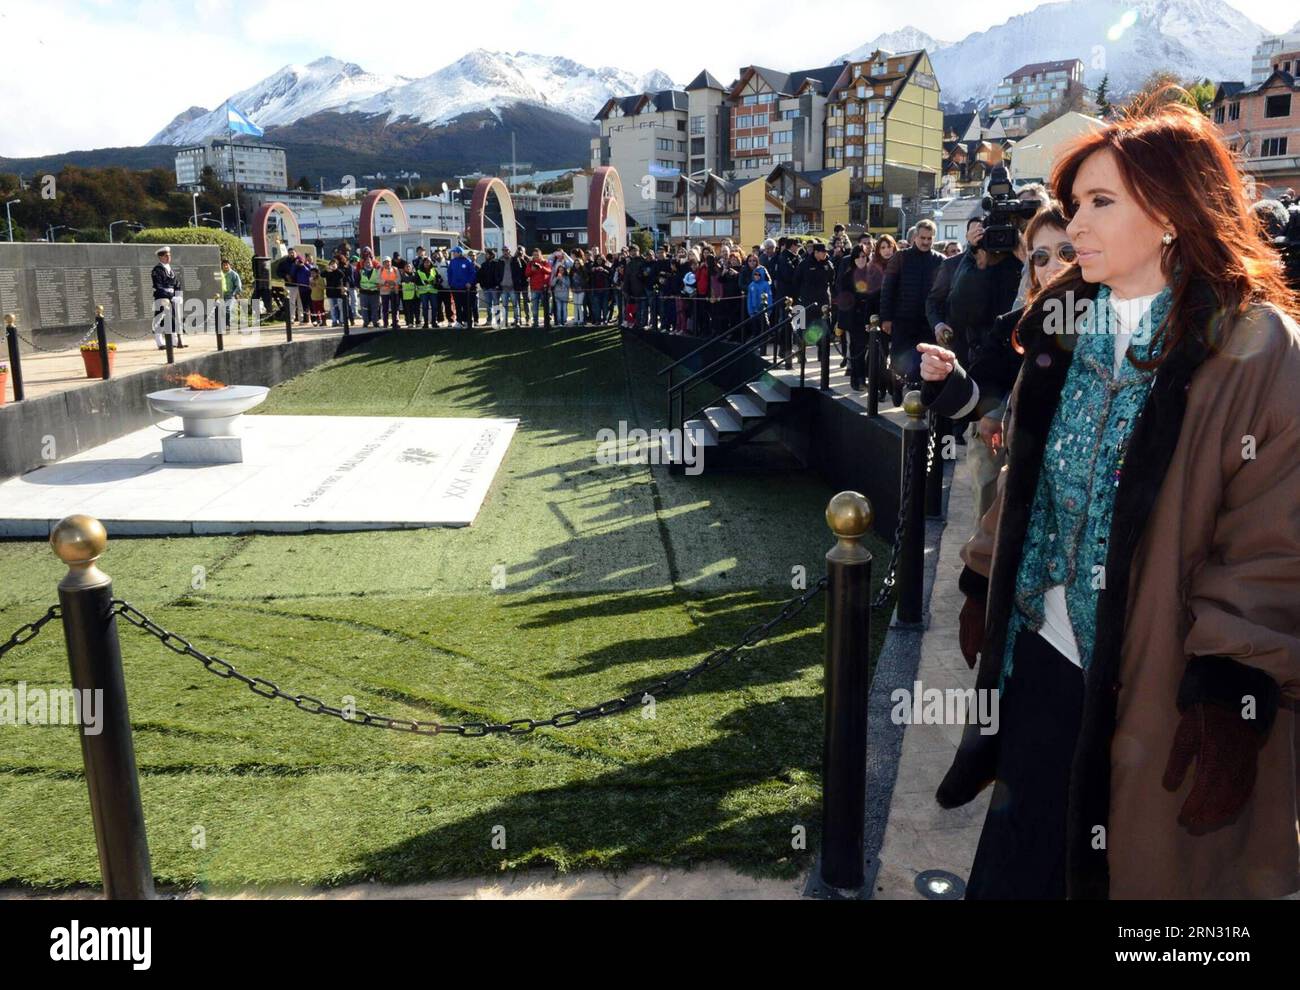 Argentina s President Cristina Fernandez de Kirchner (R) takes part in an event to mark the 33rd anniversary of the war between Argentina and the United Kingdom, in Malvinas Square, in Ushuaia, Argentina, on April 2, 2015. Presidencia/) ARGENTINA-USHUAIA-POLITICS-ANNIVERSARY TELAM PUBLICATIONxNOTxINxCHN   Argentina S President Cristina Fernandez de Kirchner r Takes Part in to Event to Mark The 33rd Anniversary of The was between Argentina and The United Kingdom in Malvinas Square in Ushuaia Argentina ON April 2 2015 Presidencia Argentina Ushuaia POLITICS Anniversary Telam PUBLICATIONxNOTxINxCH Stock Photo